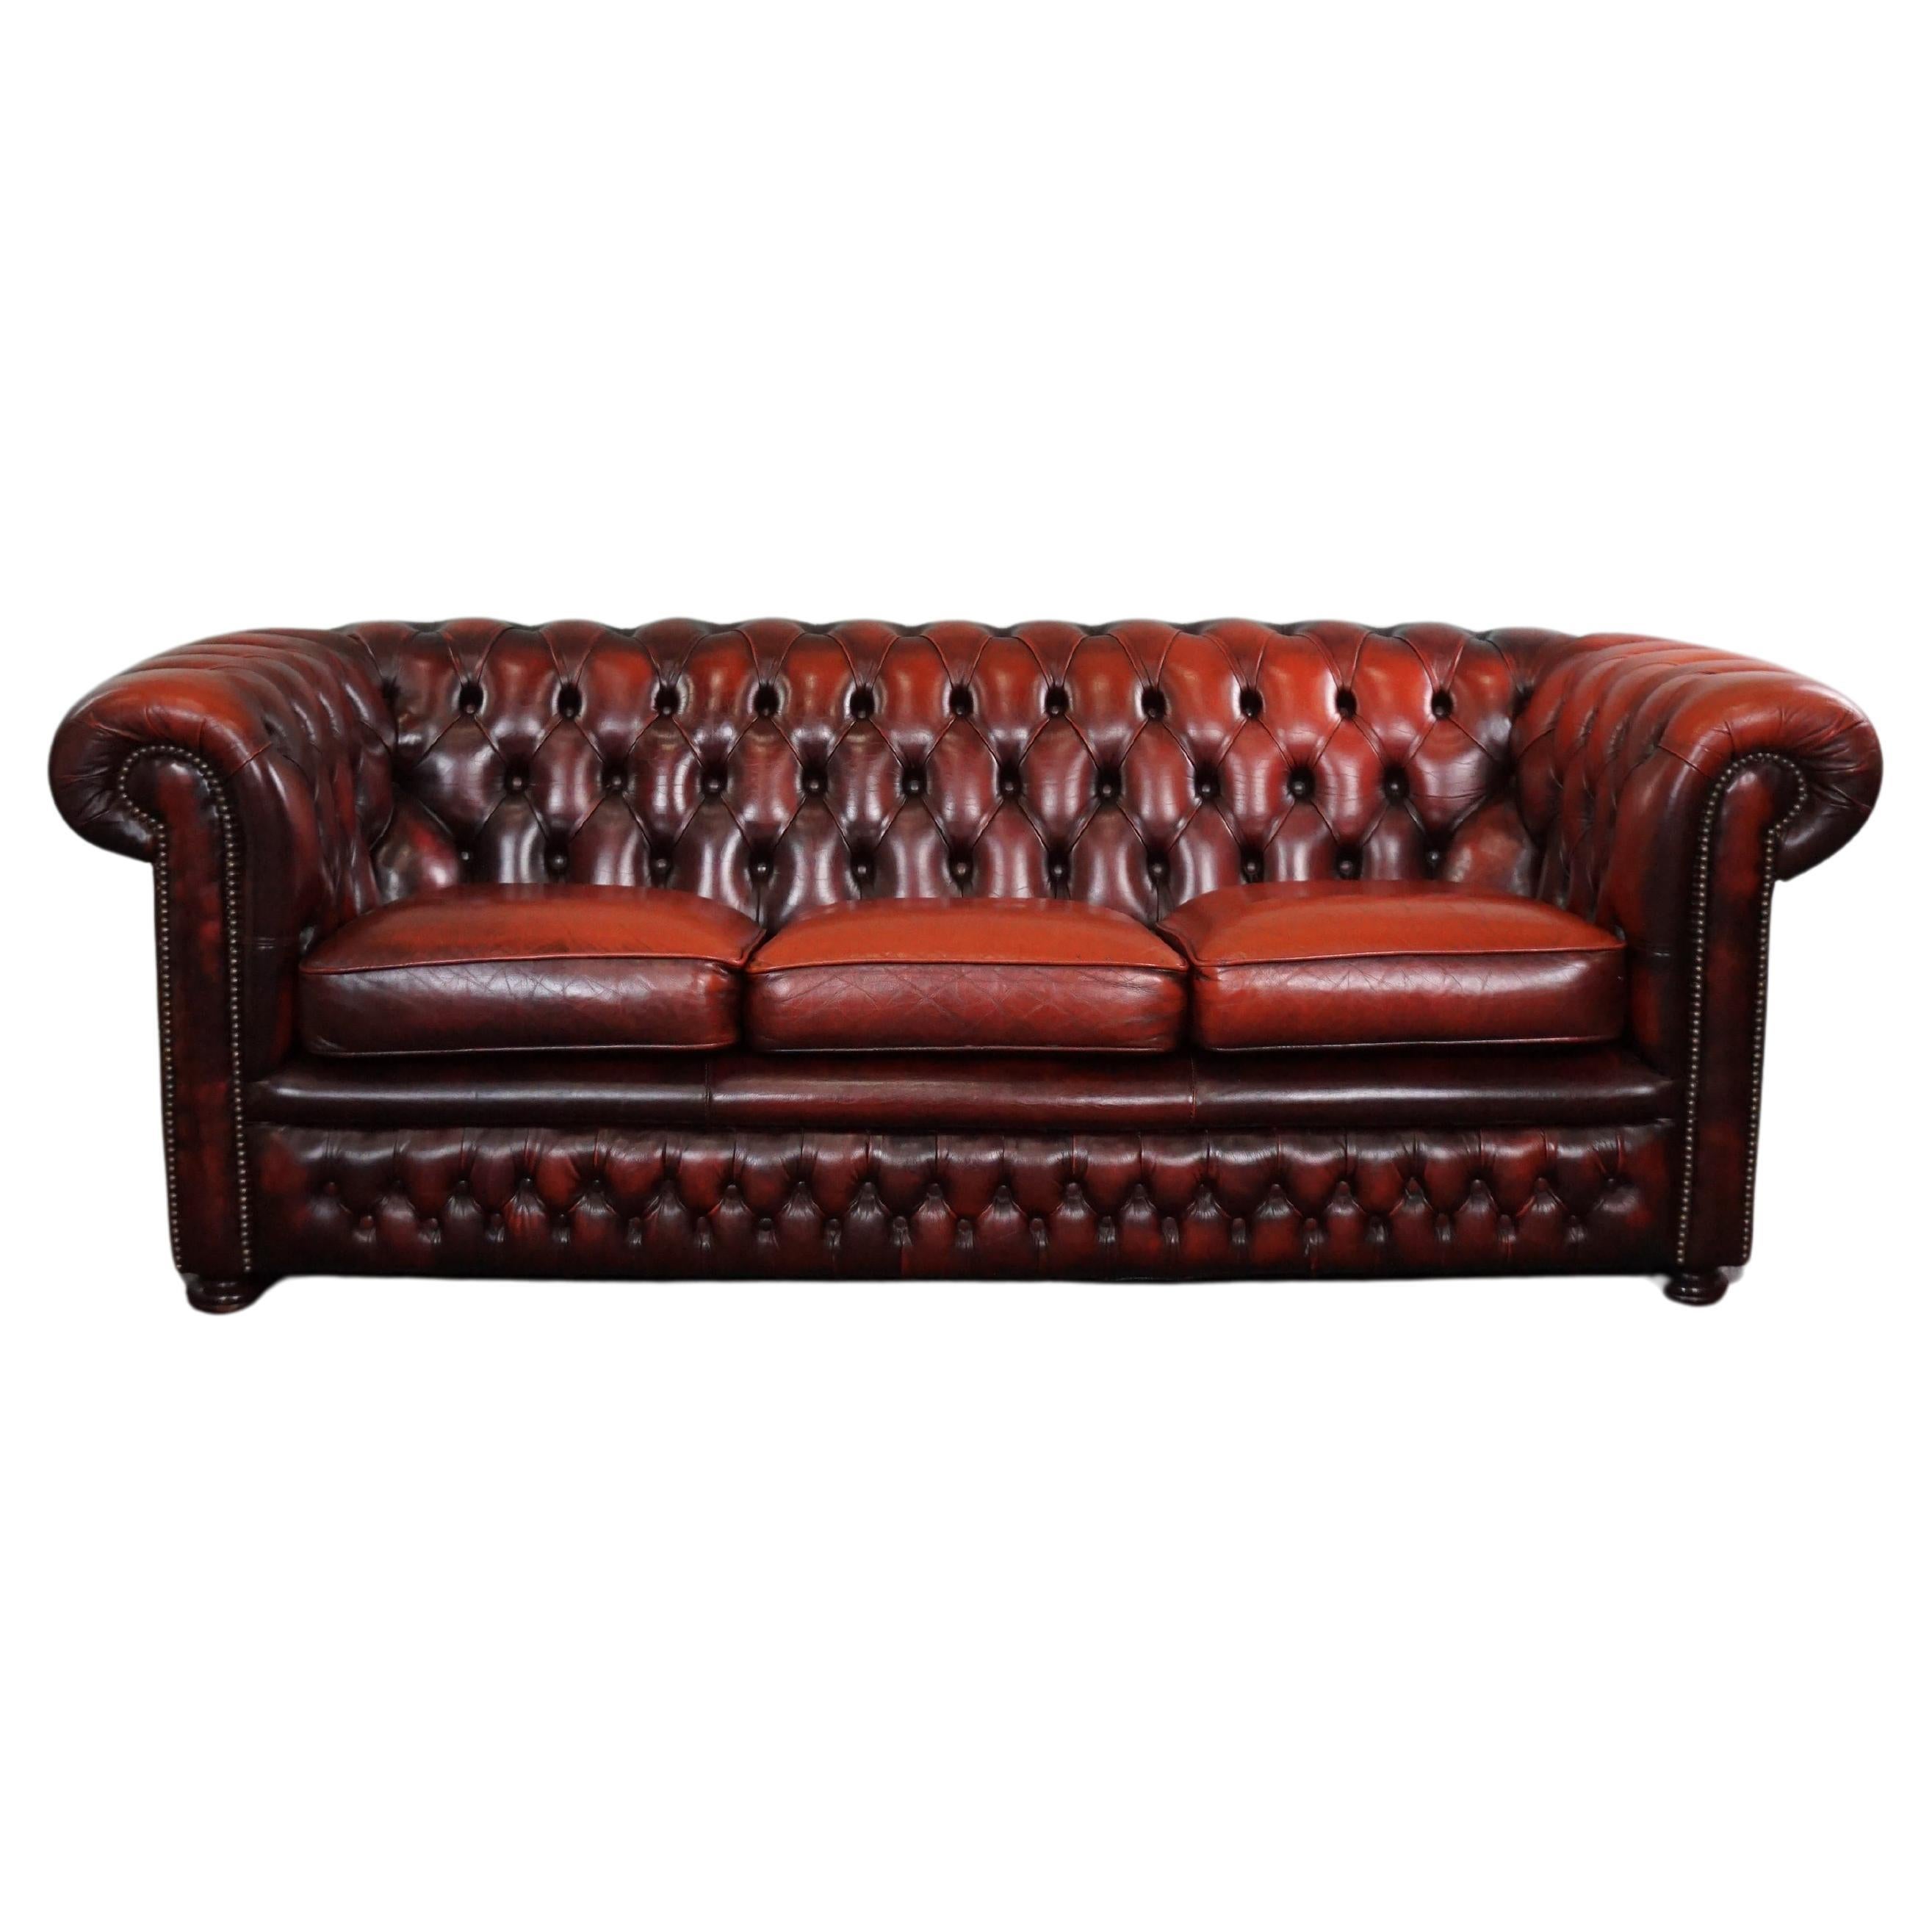 Beautiful colored red spacious cow leather Chesterfield sofa, 2.5 seater